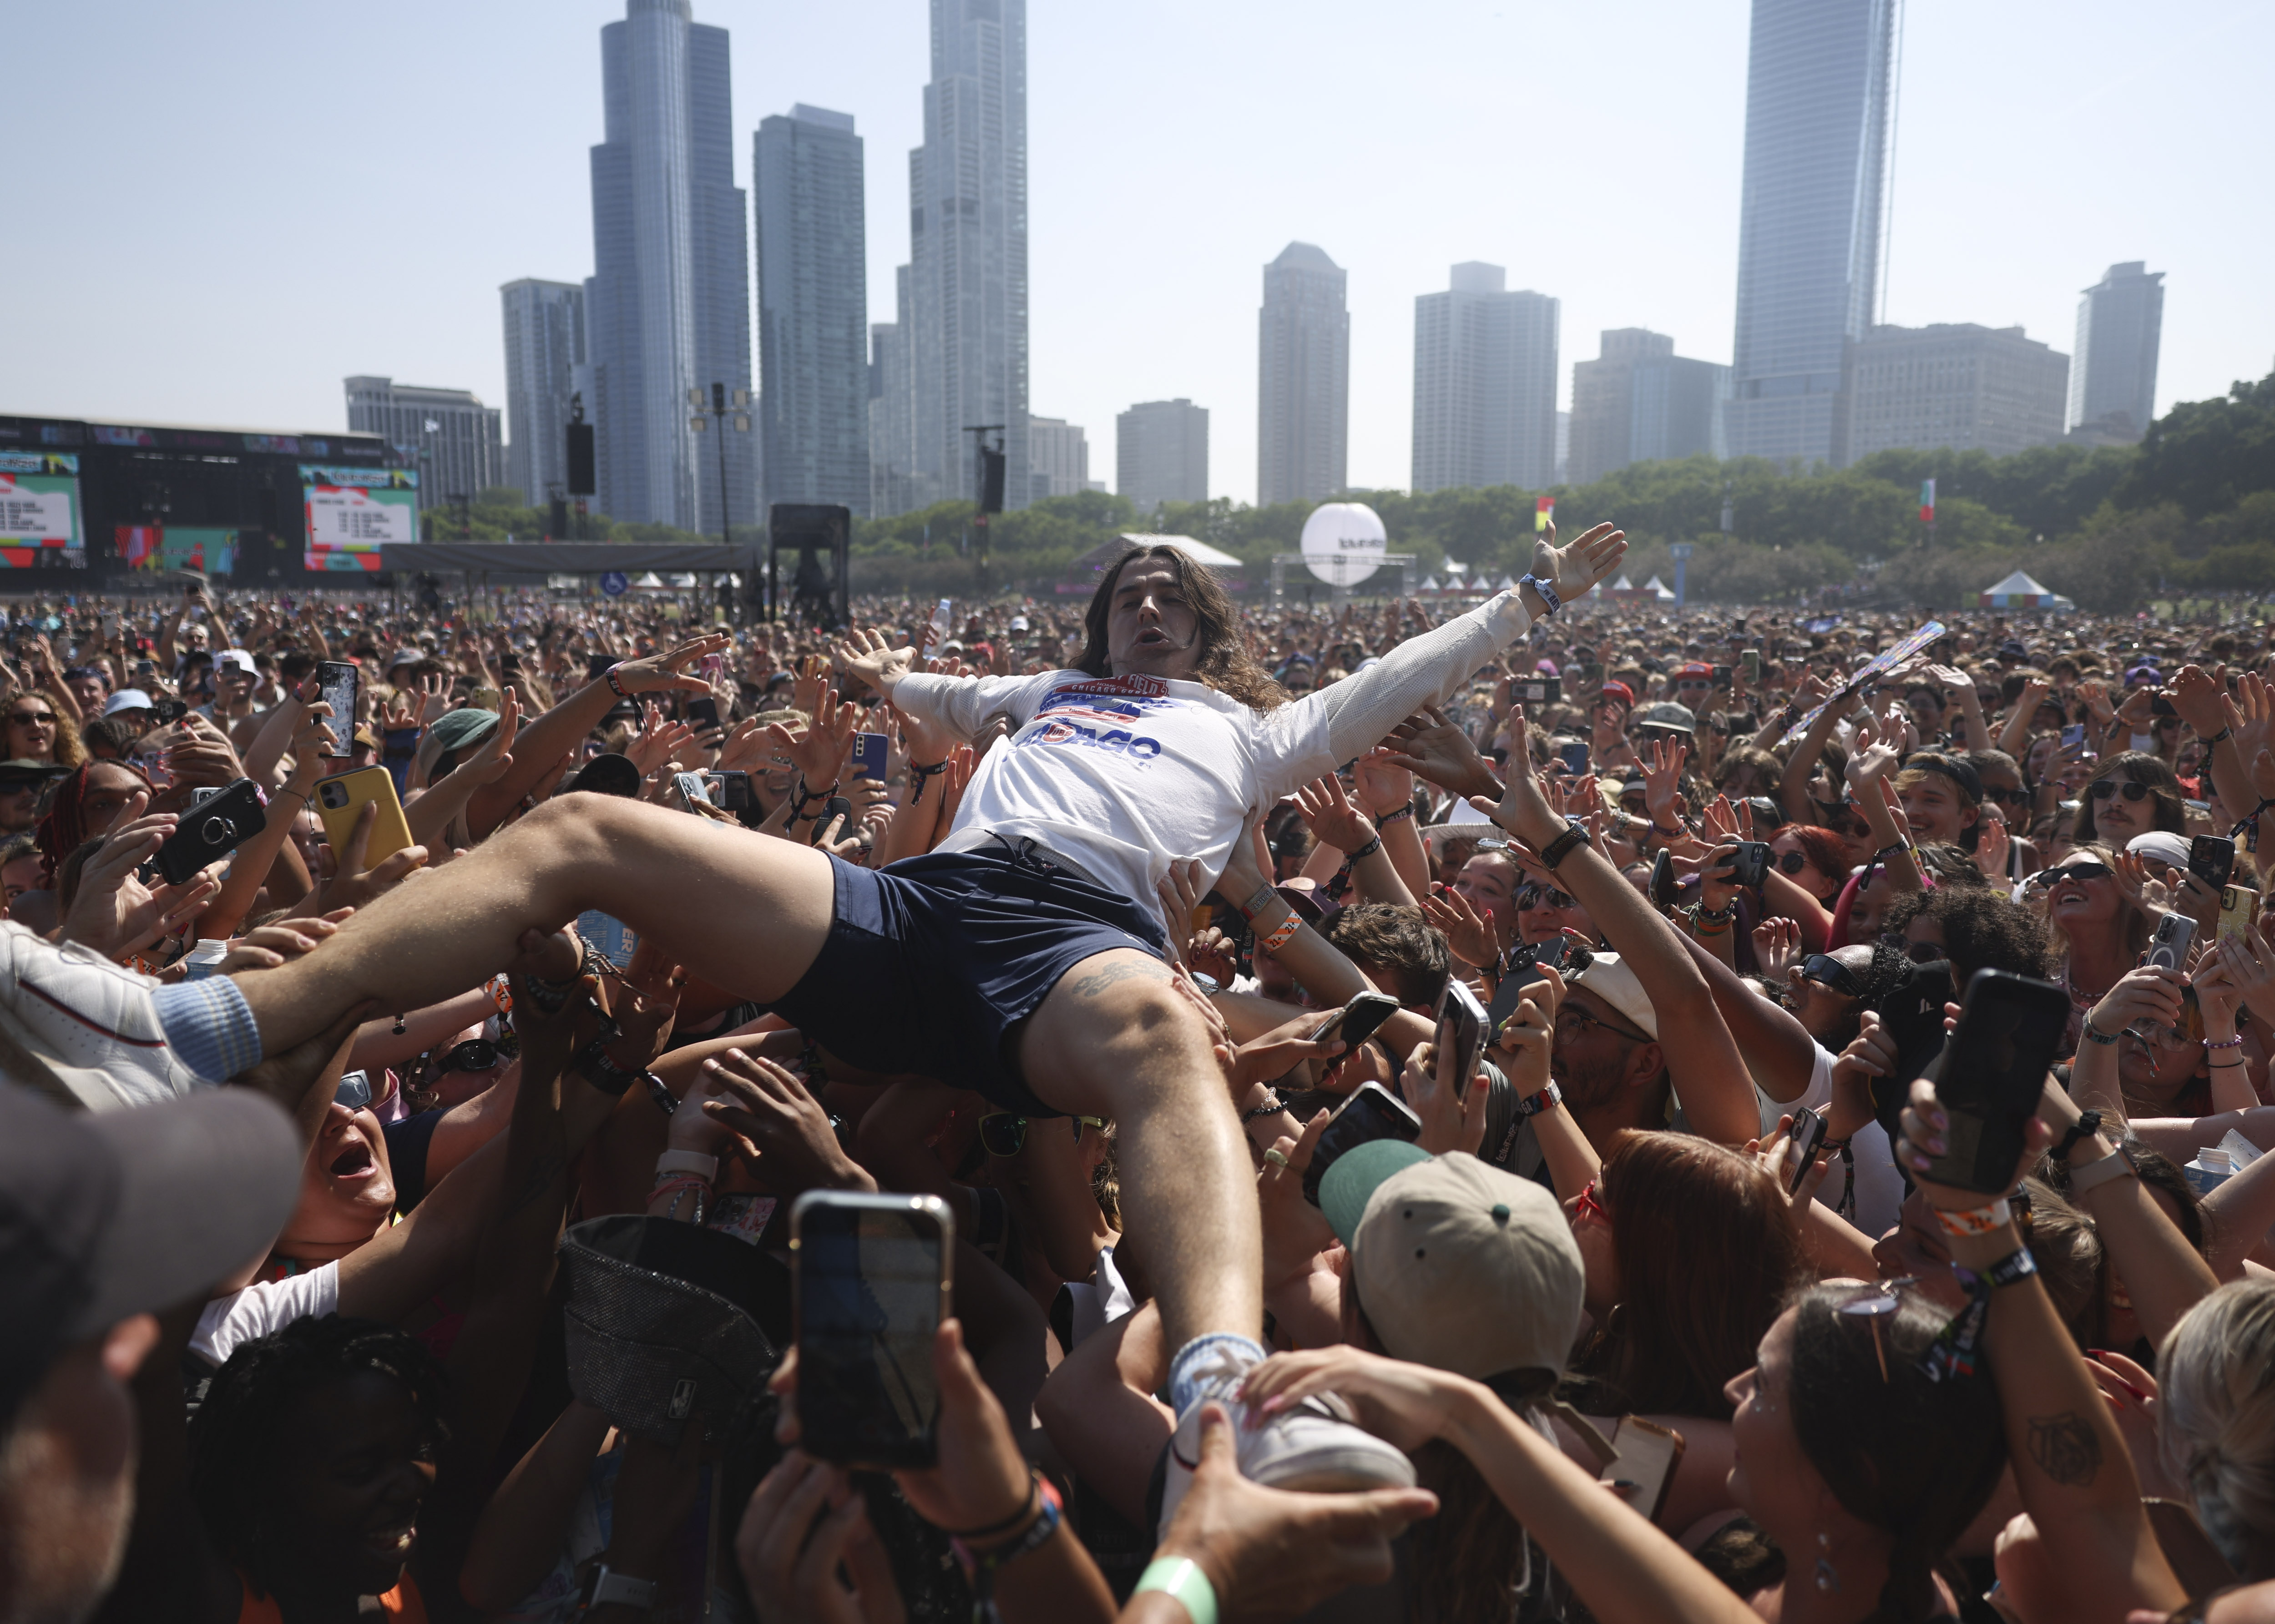 Lollapalooza Day 2: 30 Seconds to Mars reaches new heights